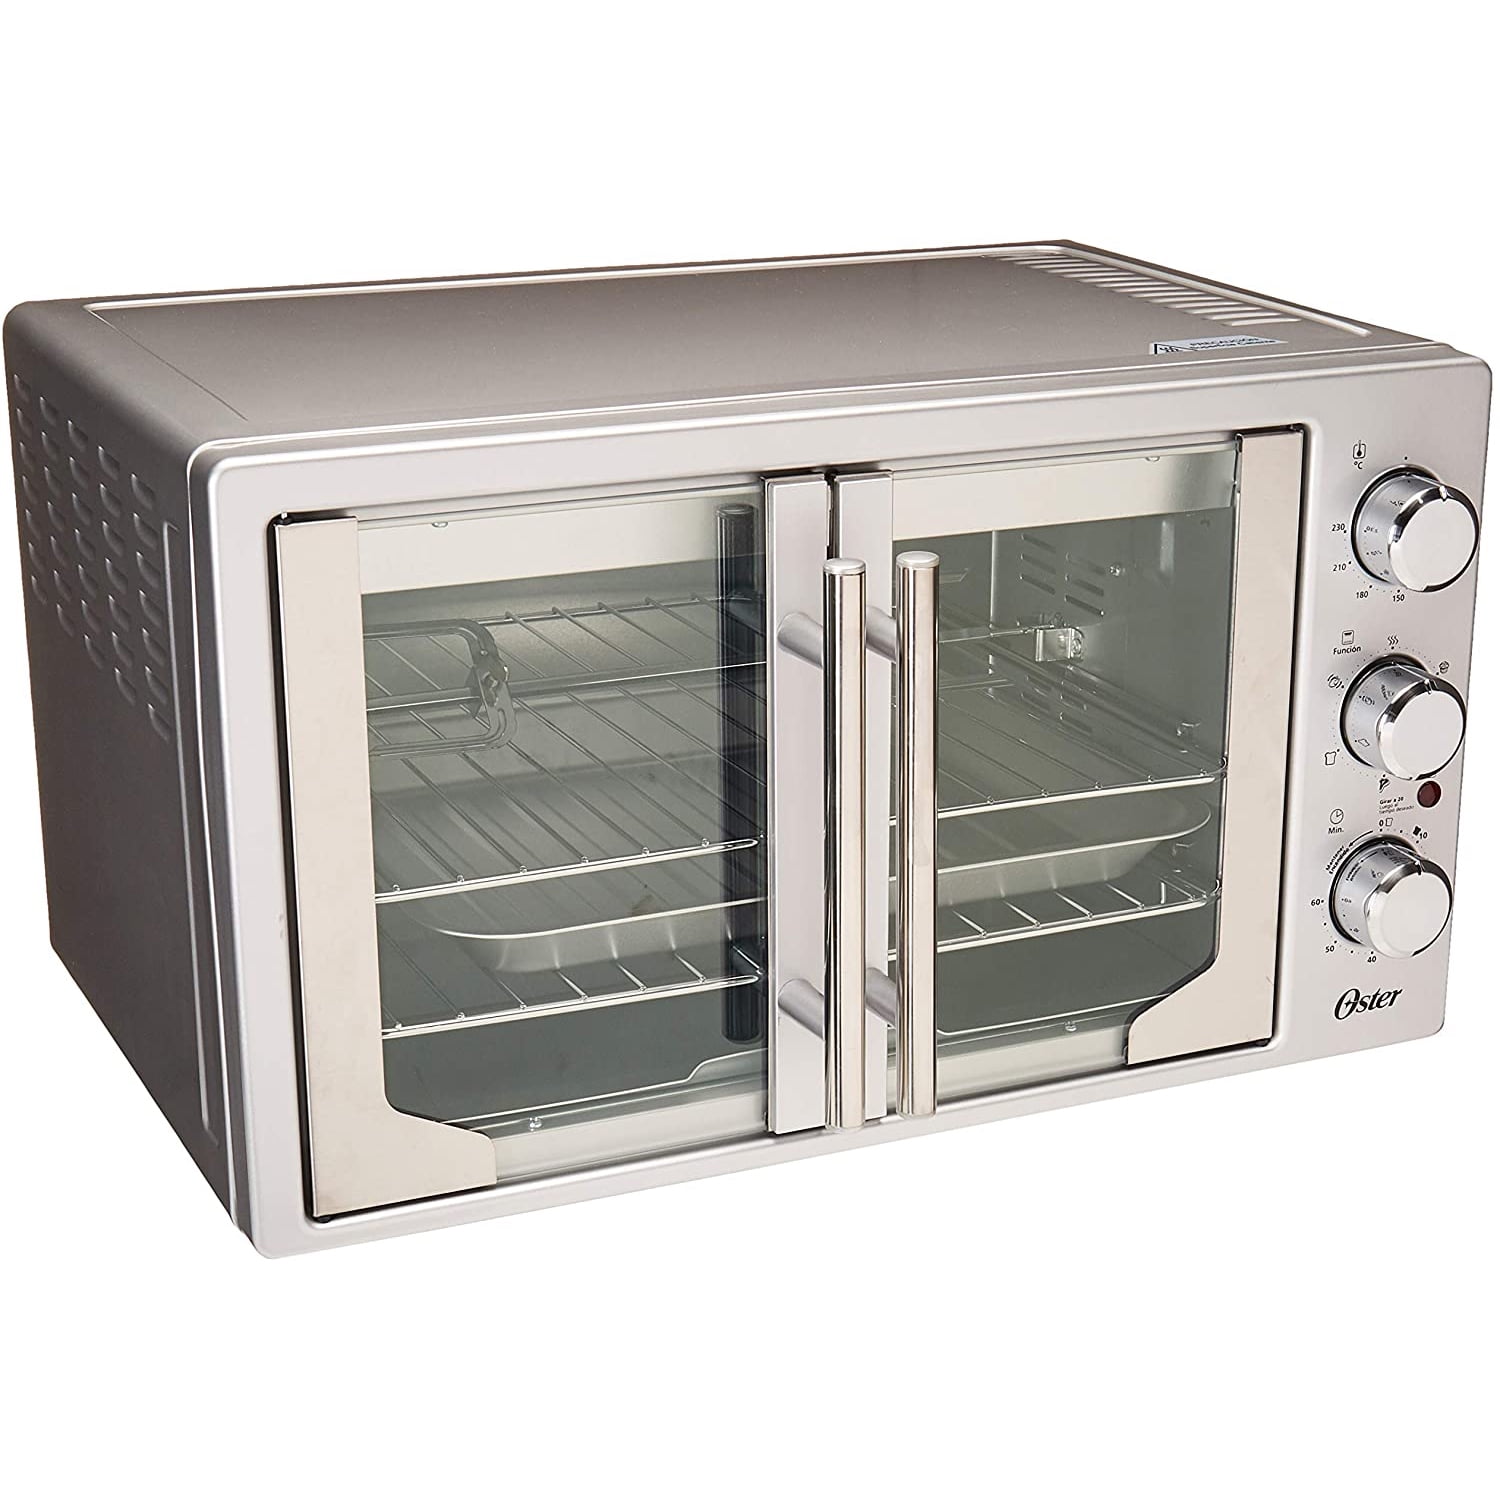 Oster Xl Digital Convection Oven With French Doors Recall ...